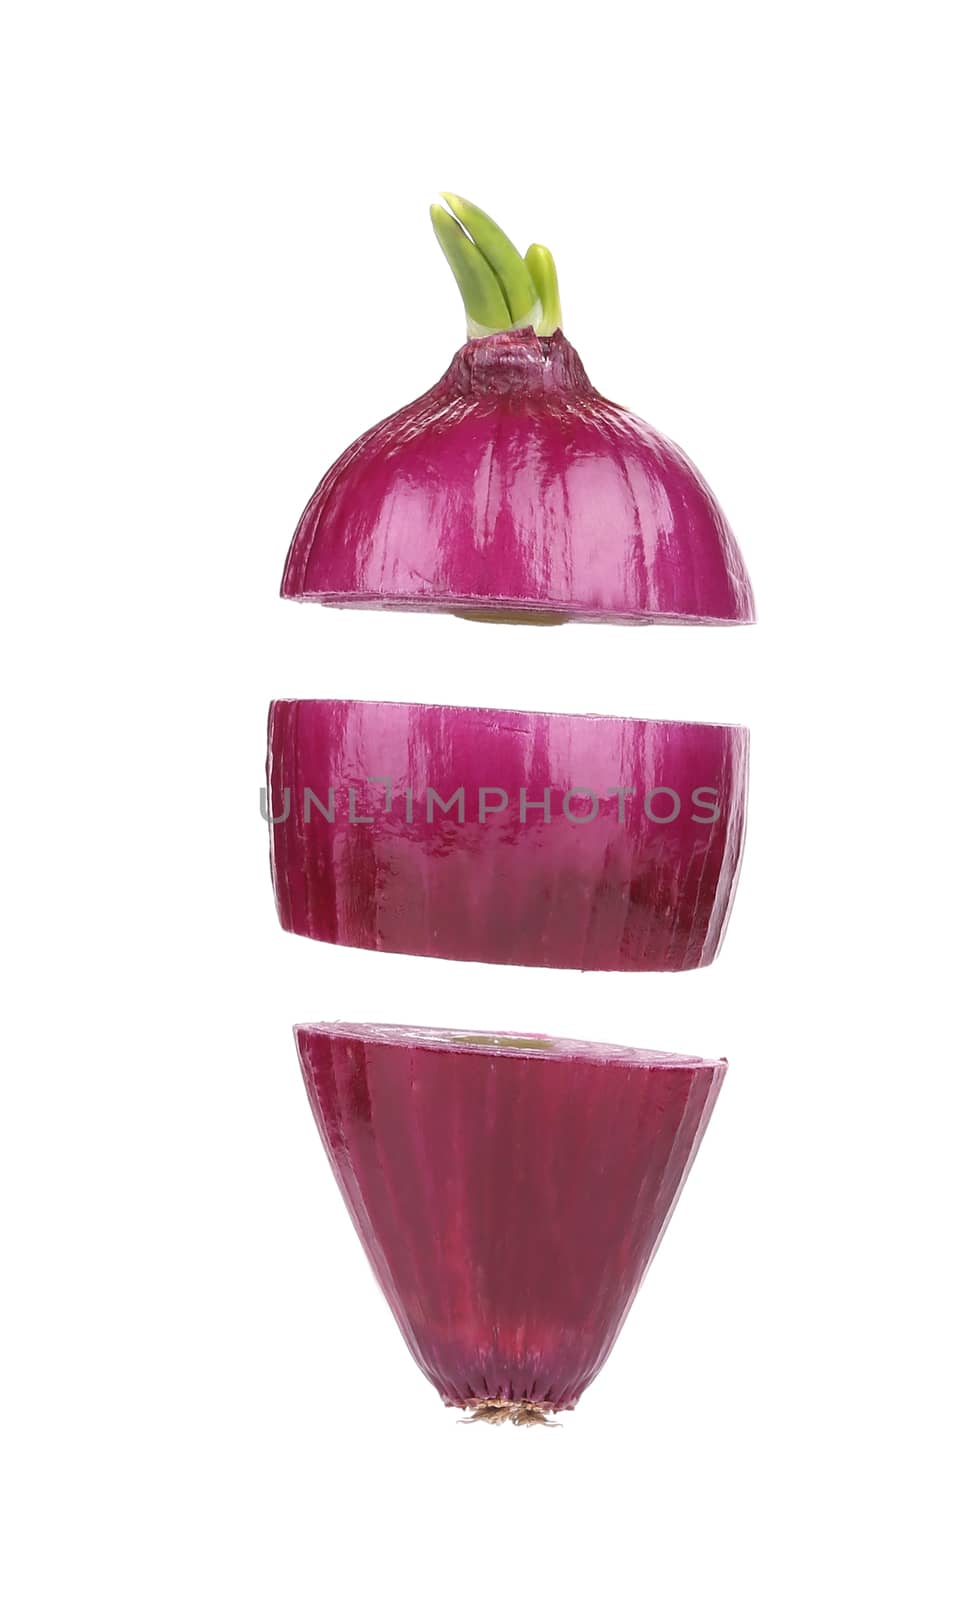 One red cut onion. Isolated on a white background.